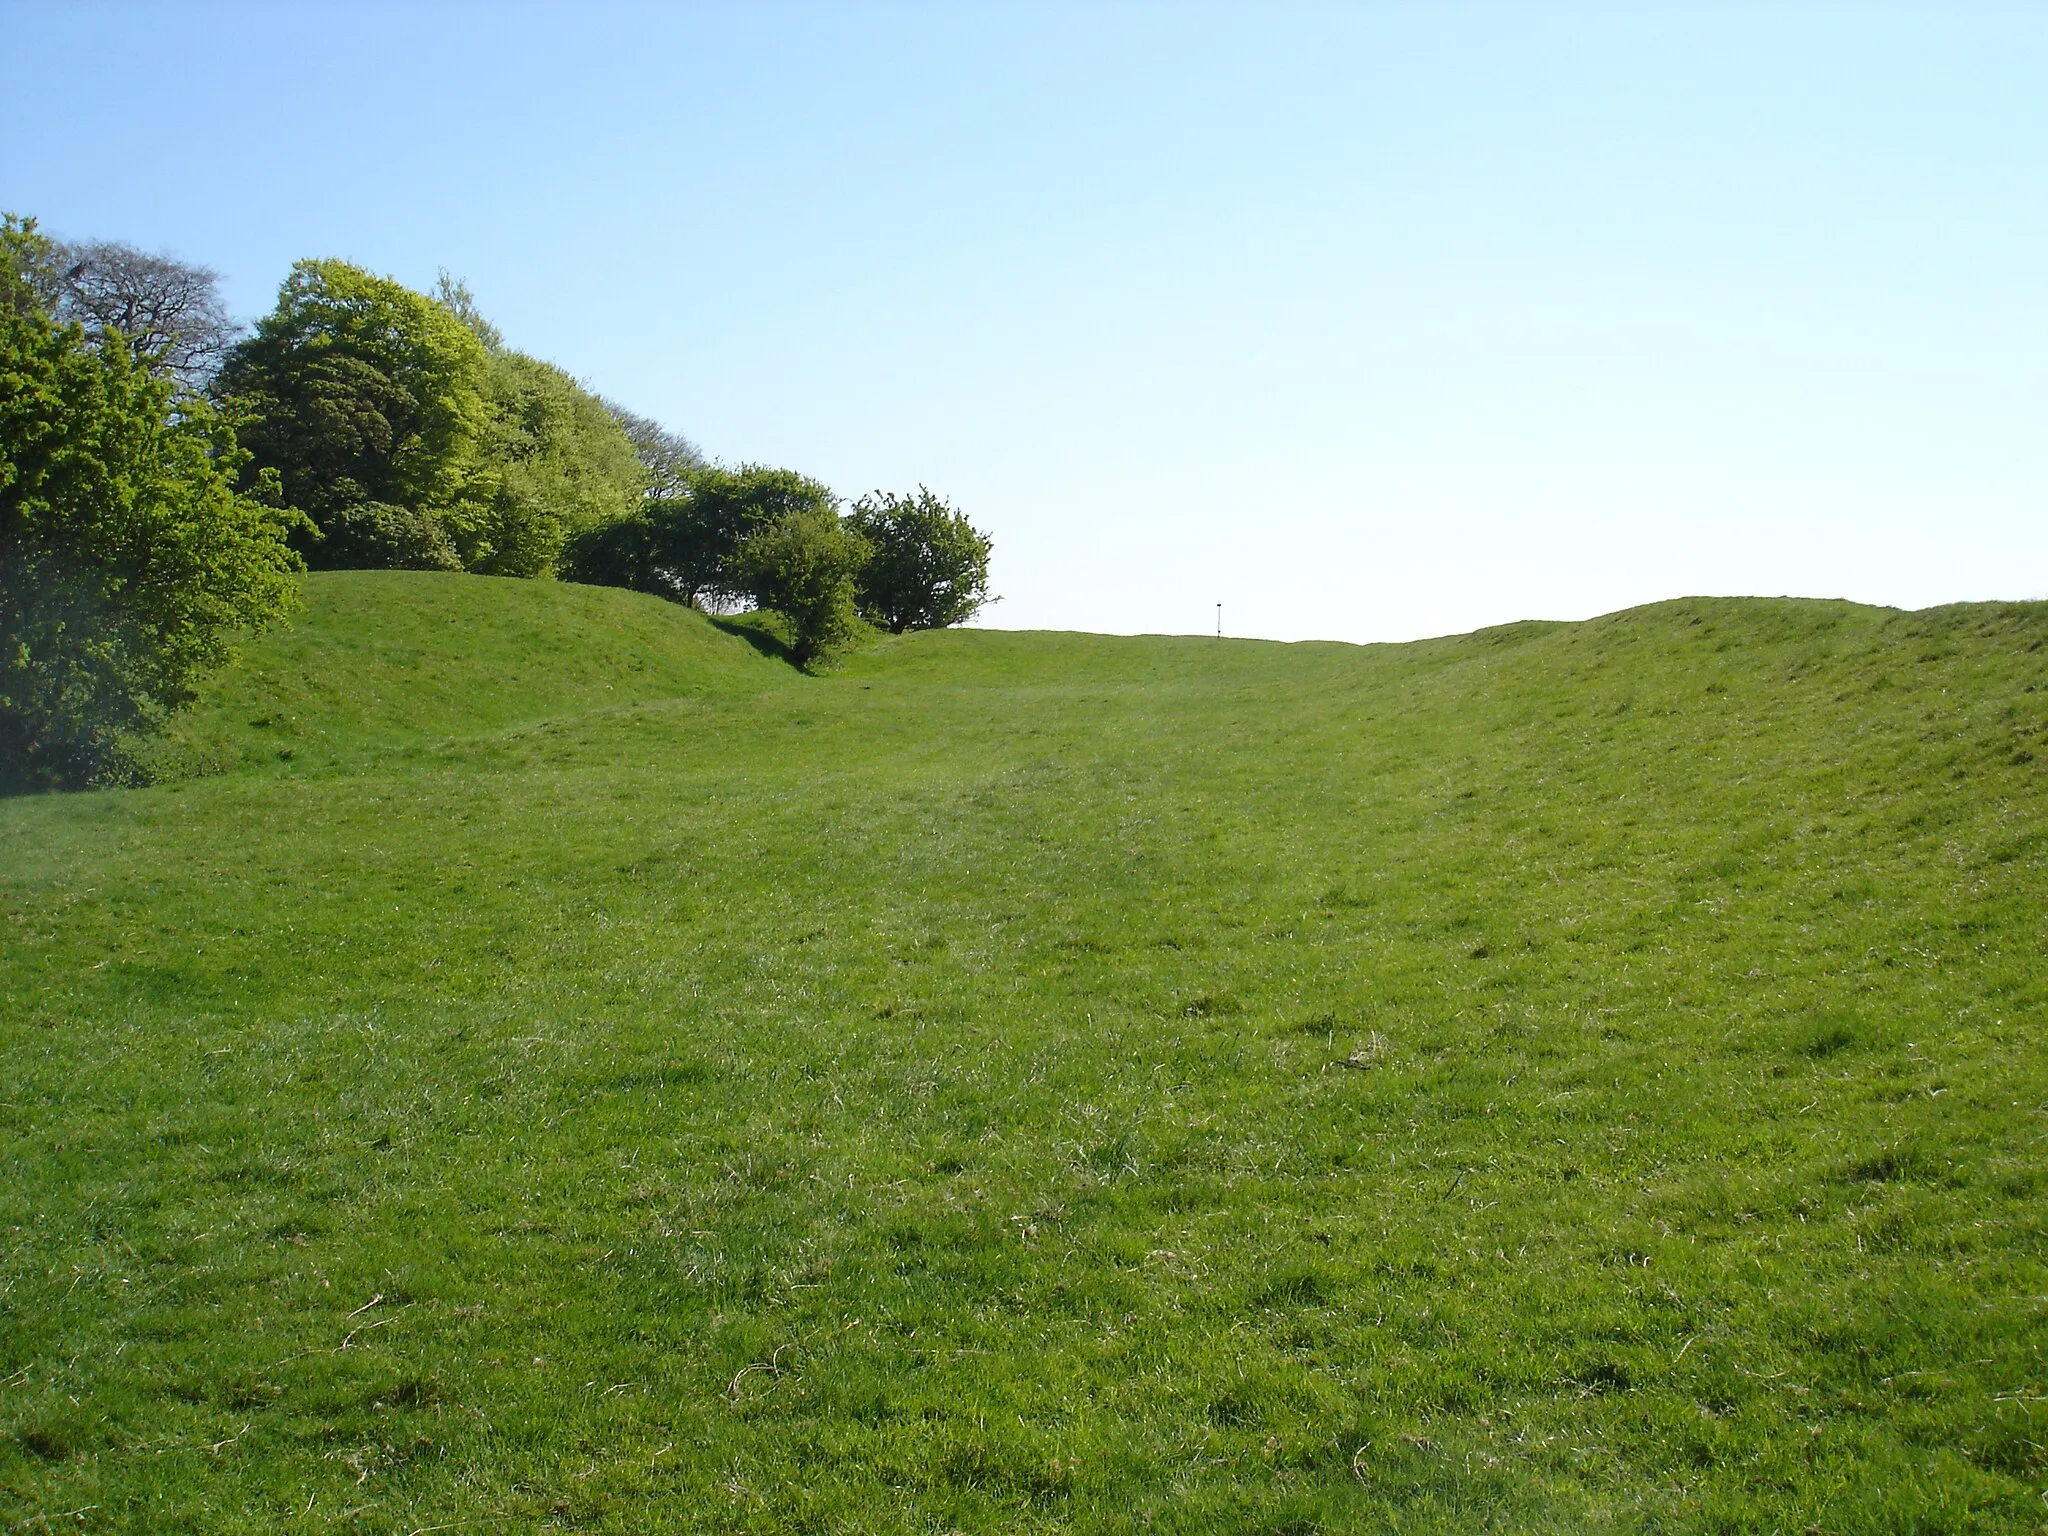 Photo showing: Banqueting Hall area of the Hill of Tara, County Meath, Ireland